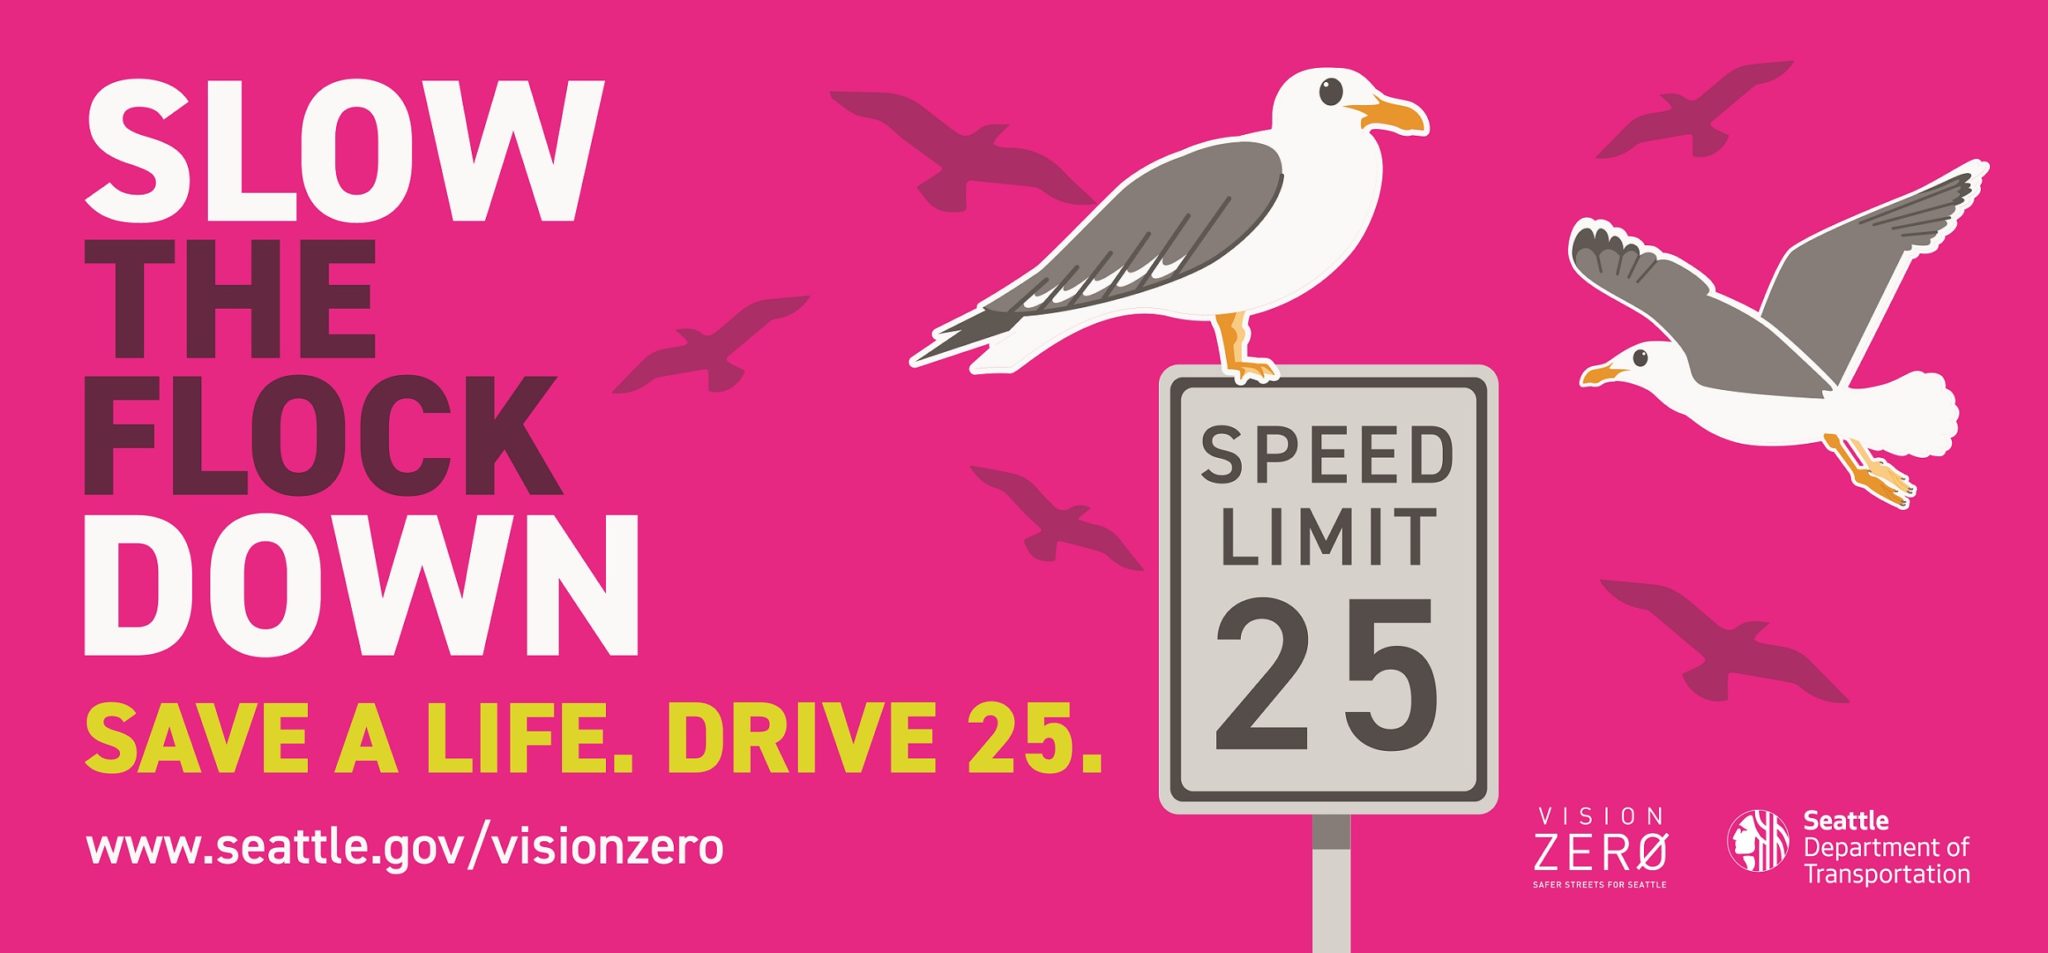 Our Slow the Flock Down campaign signs help encourage drivers to slow down while driving in the city of Seattle to advance safety of all people. This graphic has seagulls flying and sitting on a 25 MPH speed limit sign, with the words "Slow the Flock Down" in large sized text.